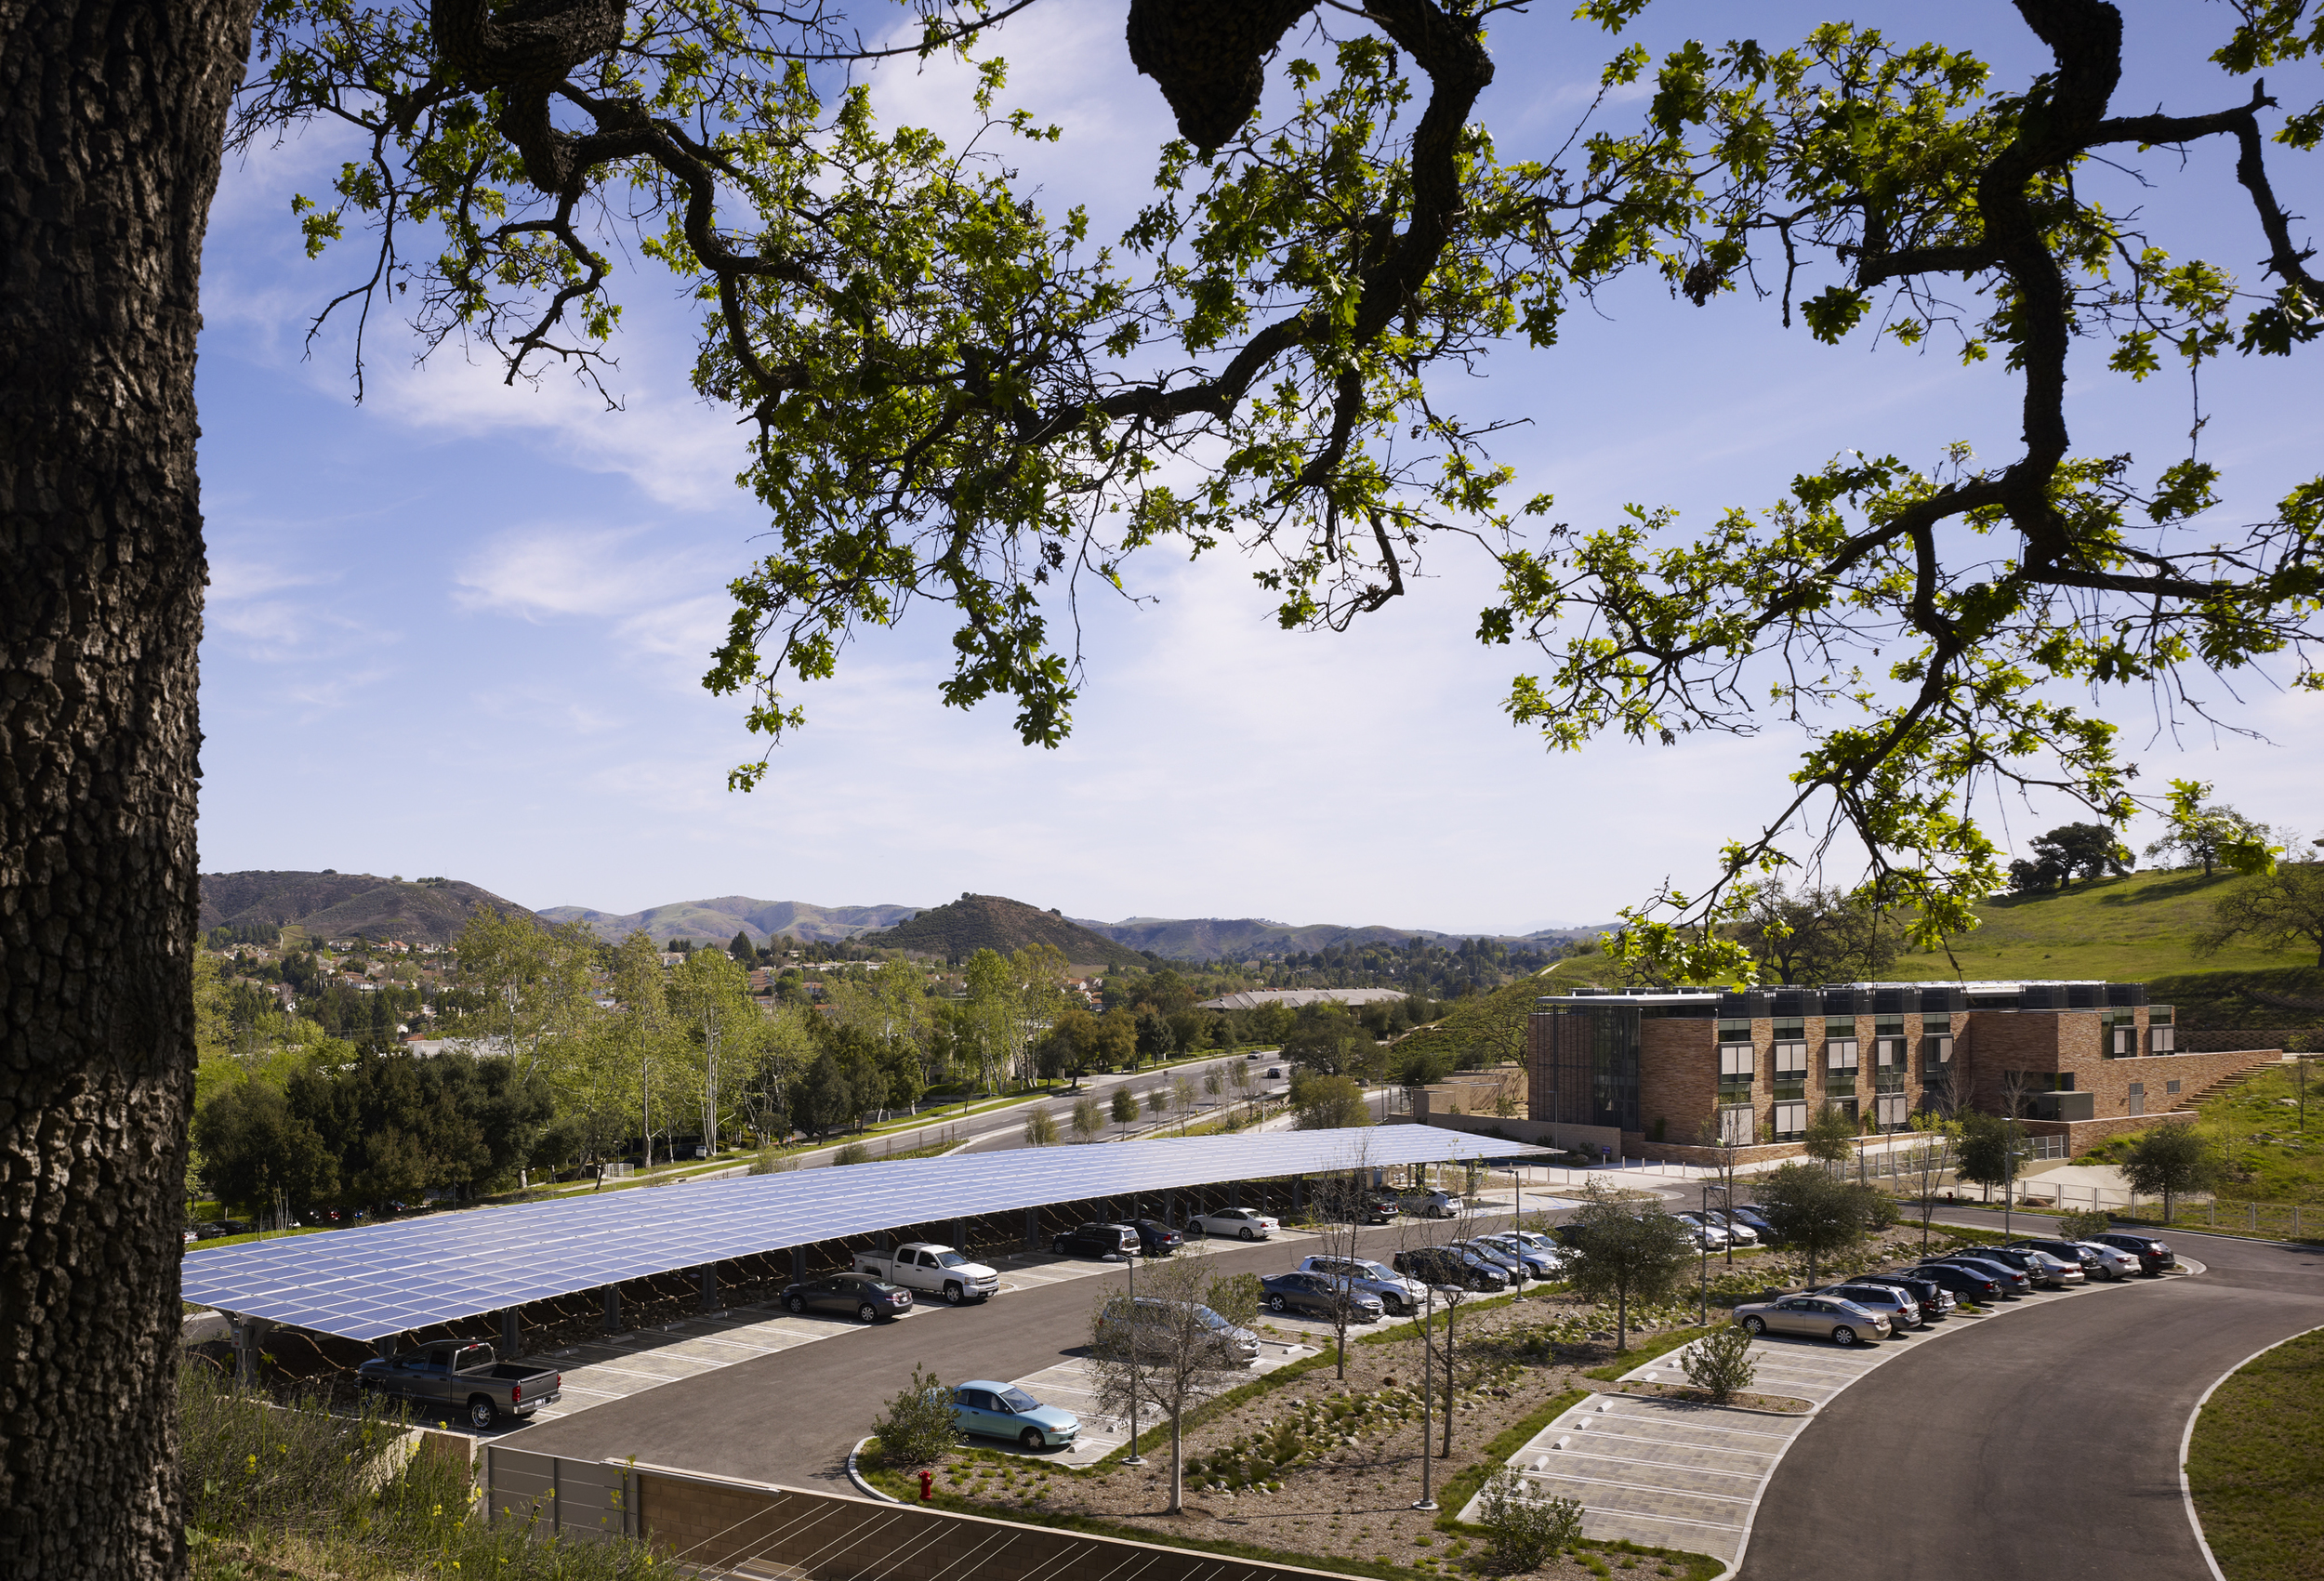   Watch Video      Conrad Hilton Foundation  ZGF Architects  Agoura Hills, CA      Return to Projects  